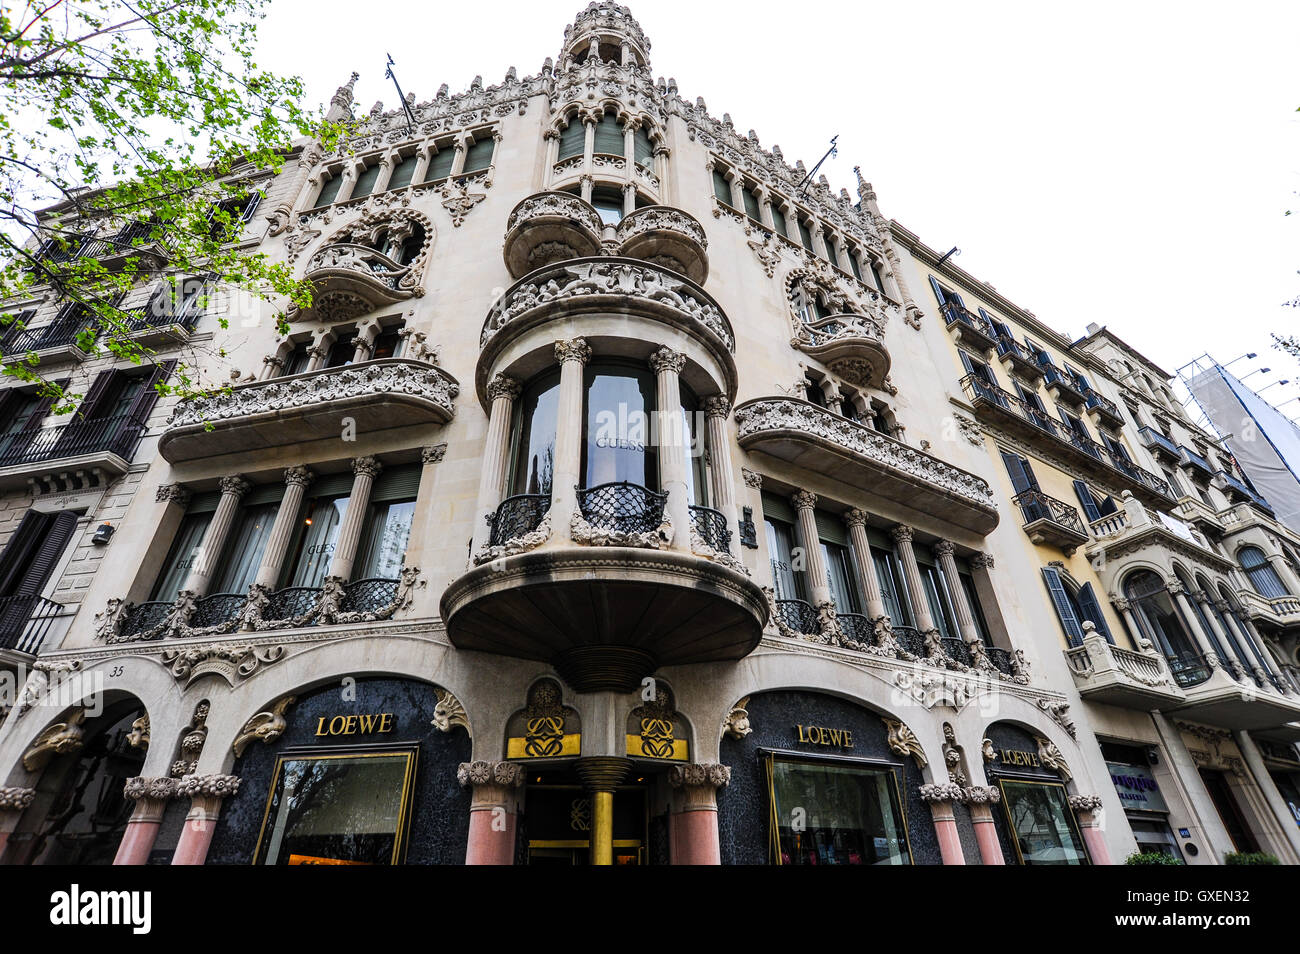 Spain, Barcelona. The Casa Lleó-Morera is a building designed by Lluís Domènech i Montaner. Stock Photo